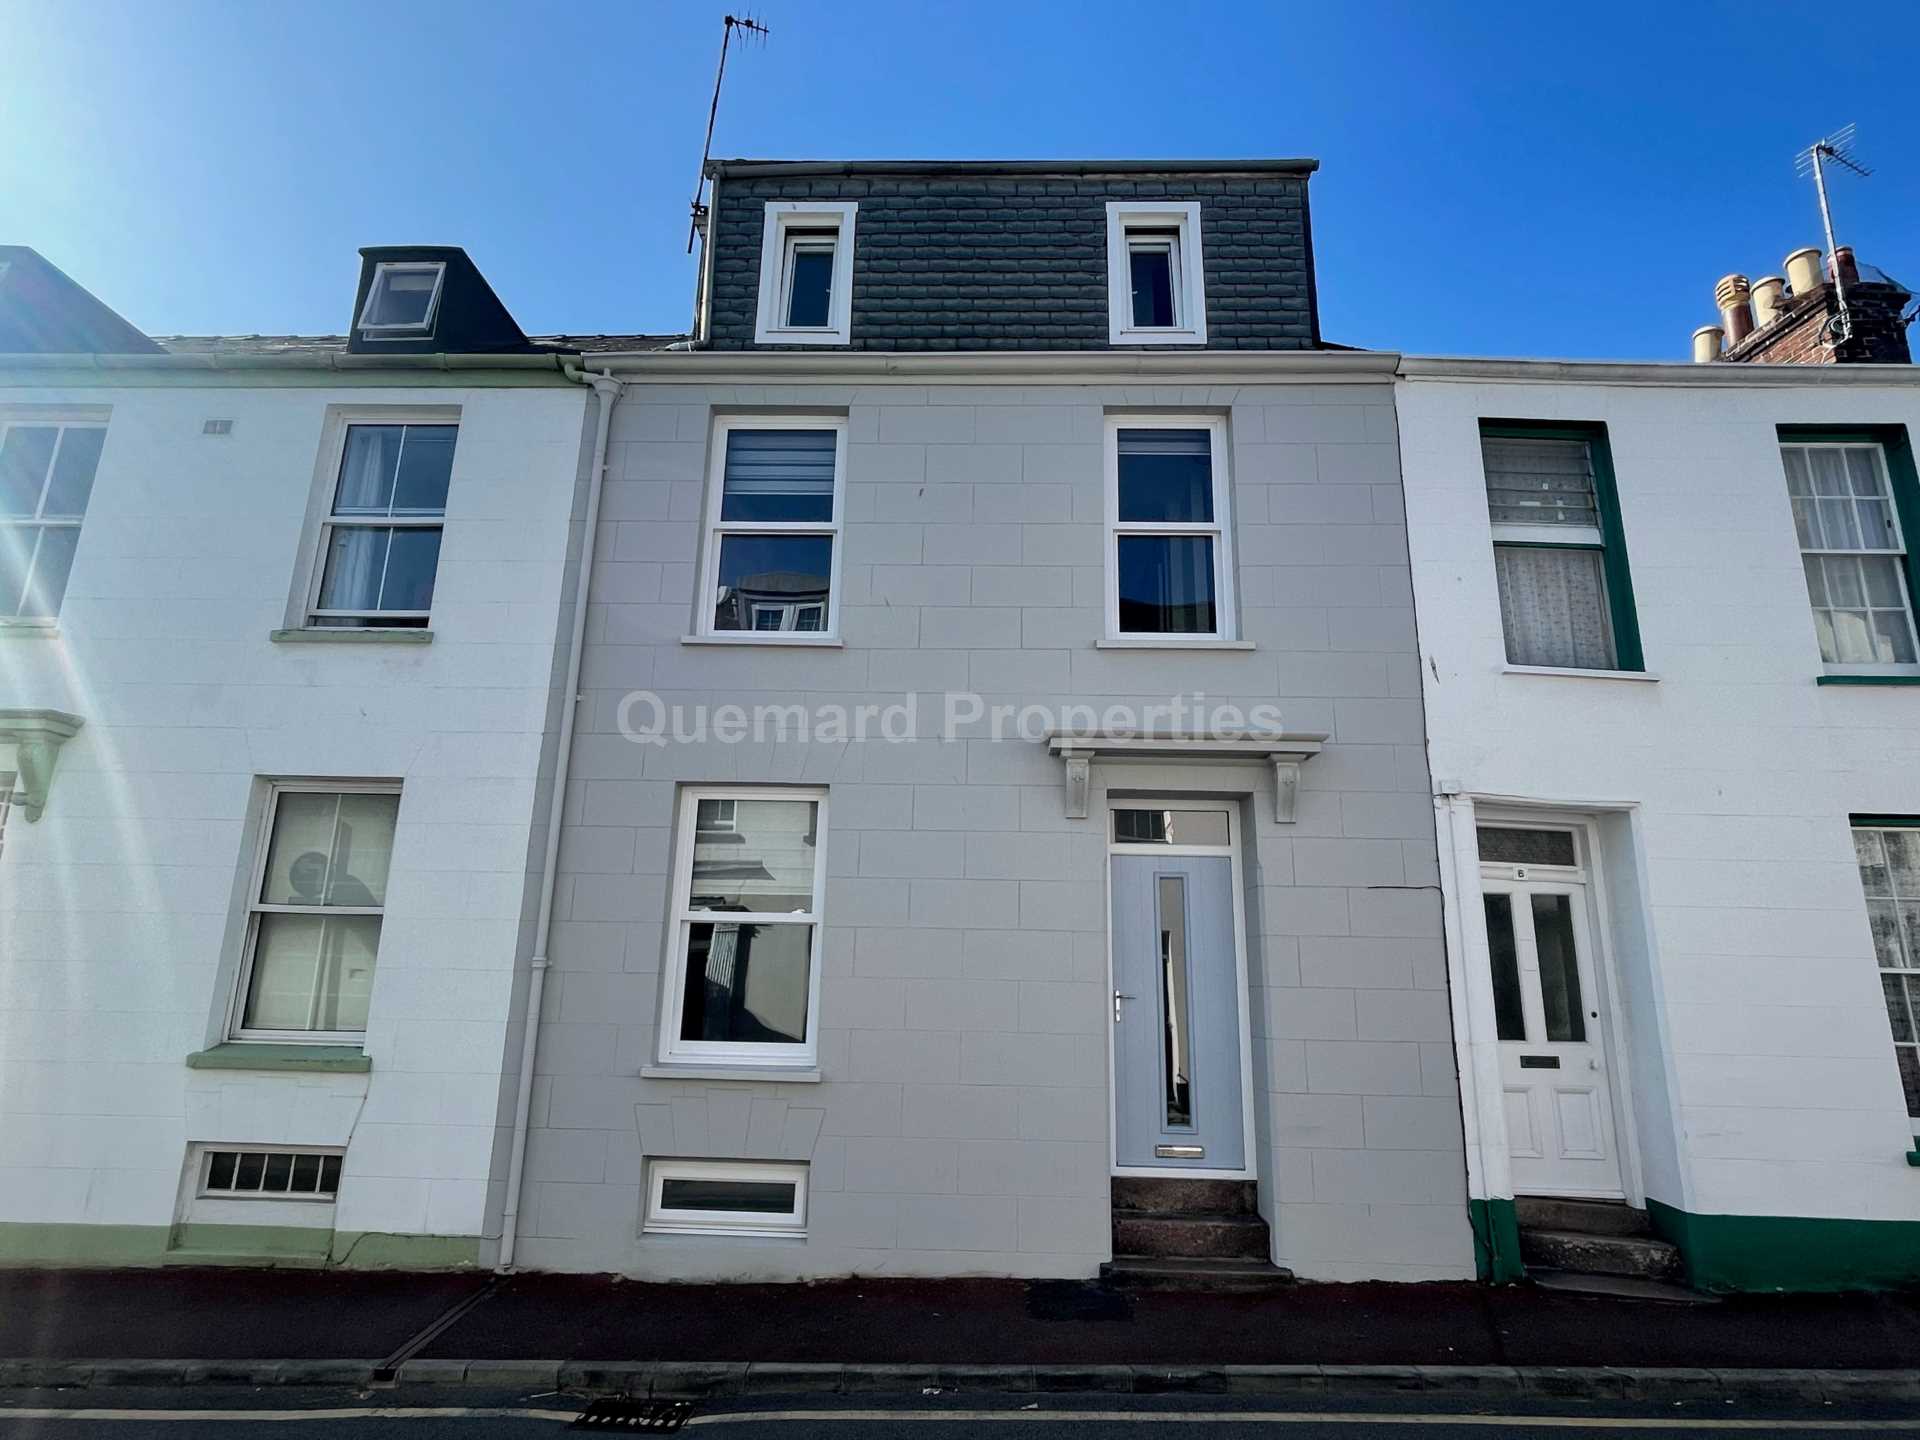 Chevalier Road, St Helier, Image 16